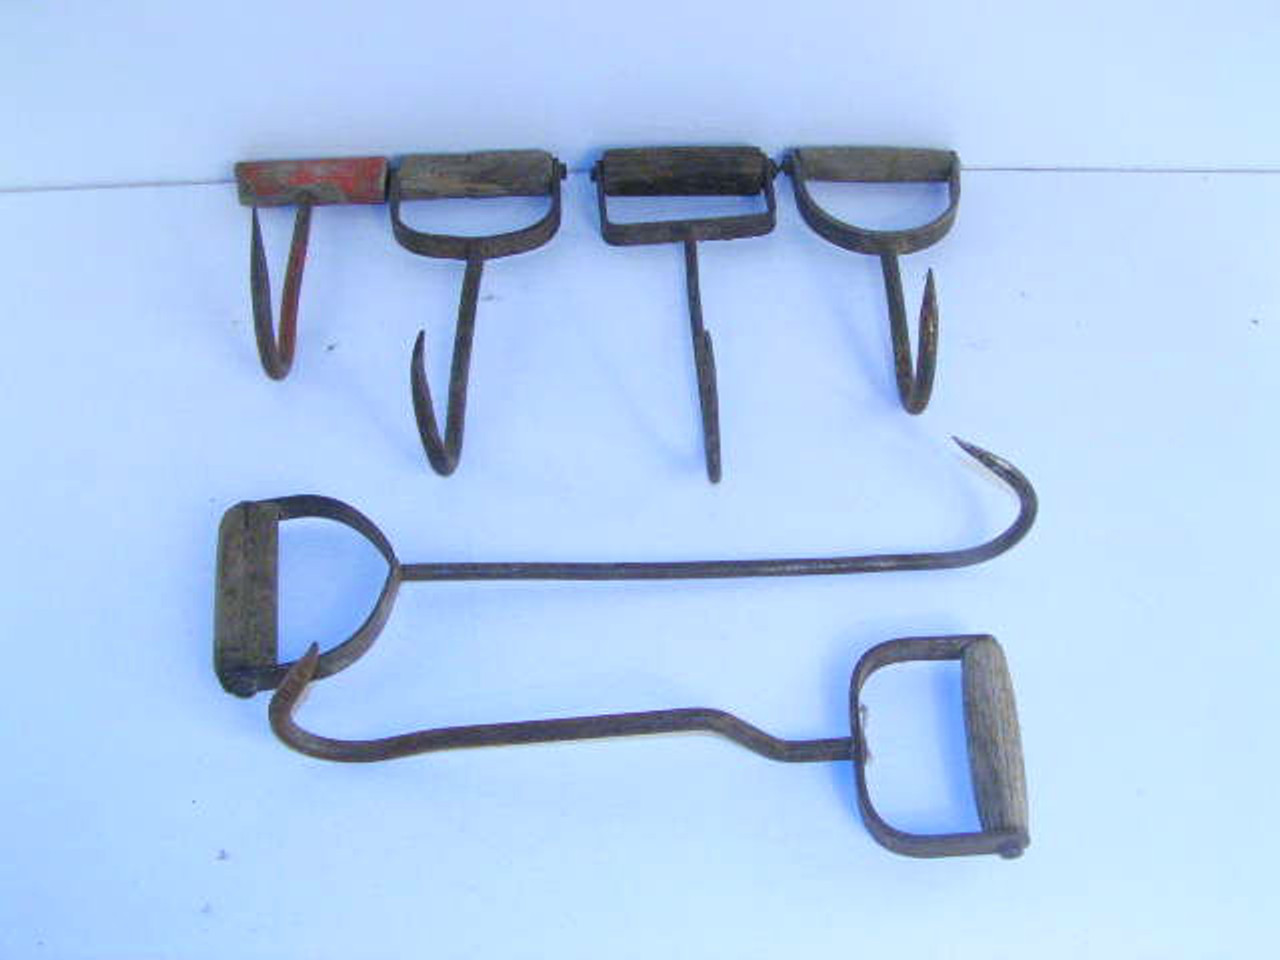 These are examples of the old hay hooks with wooden handles used